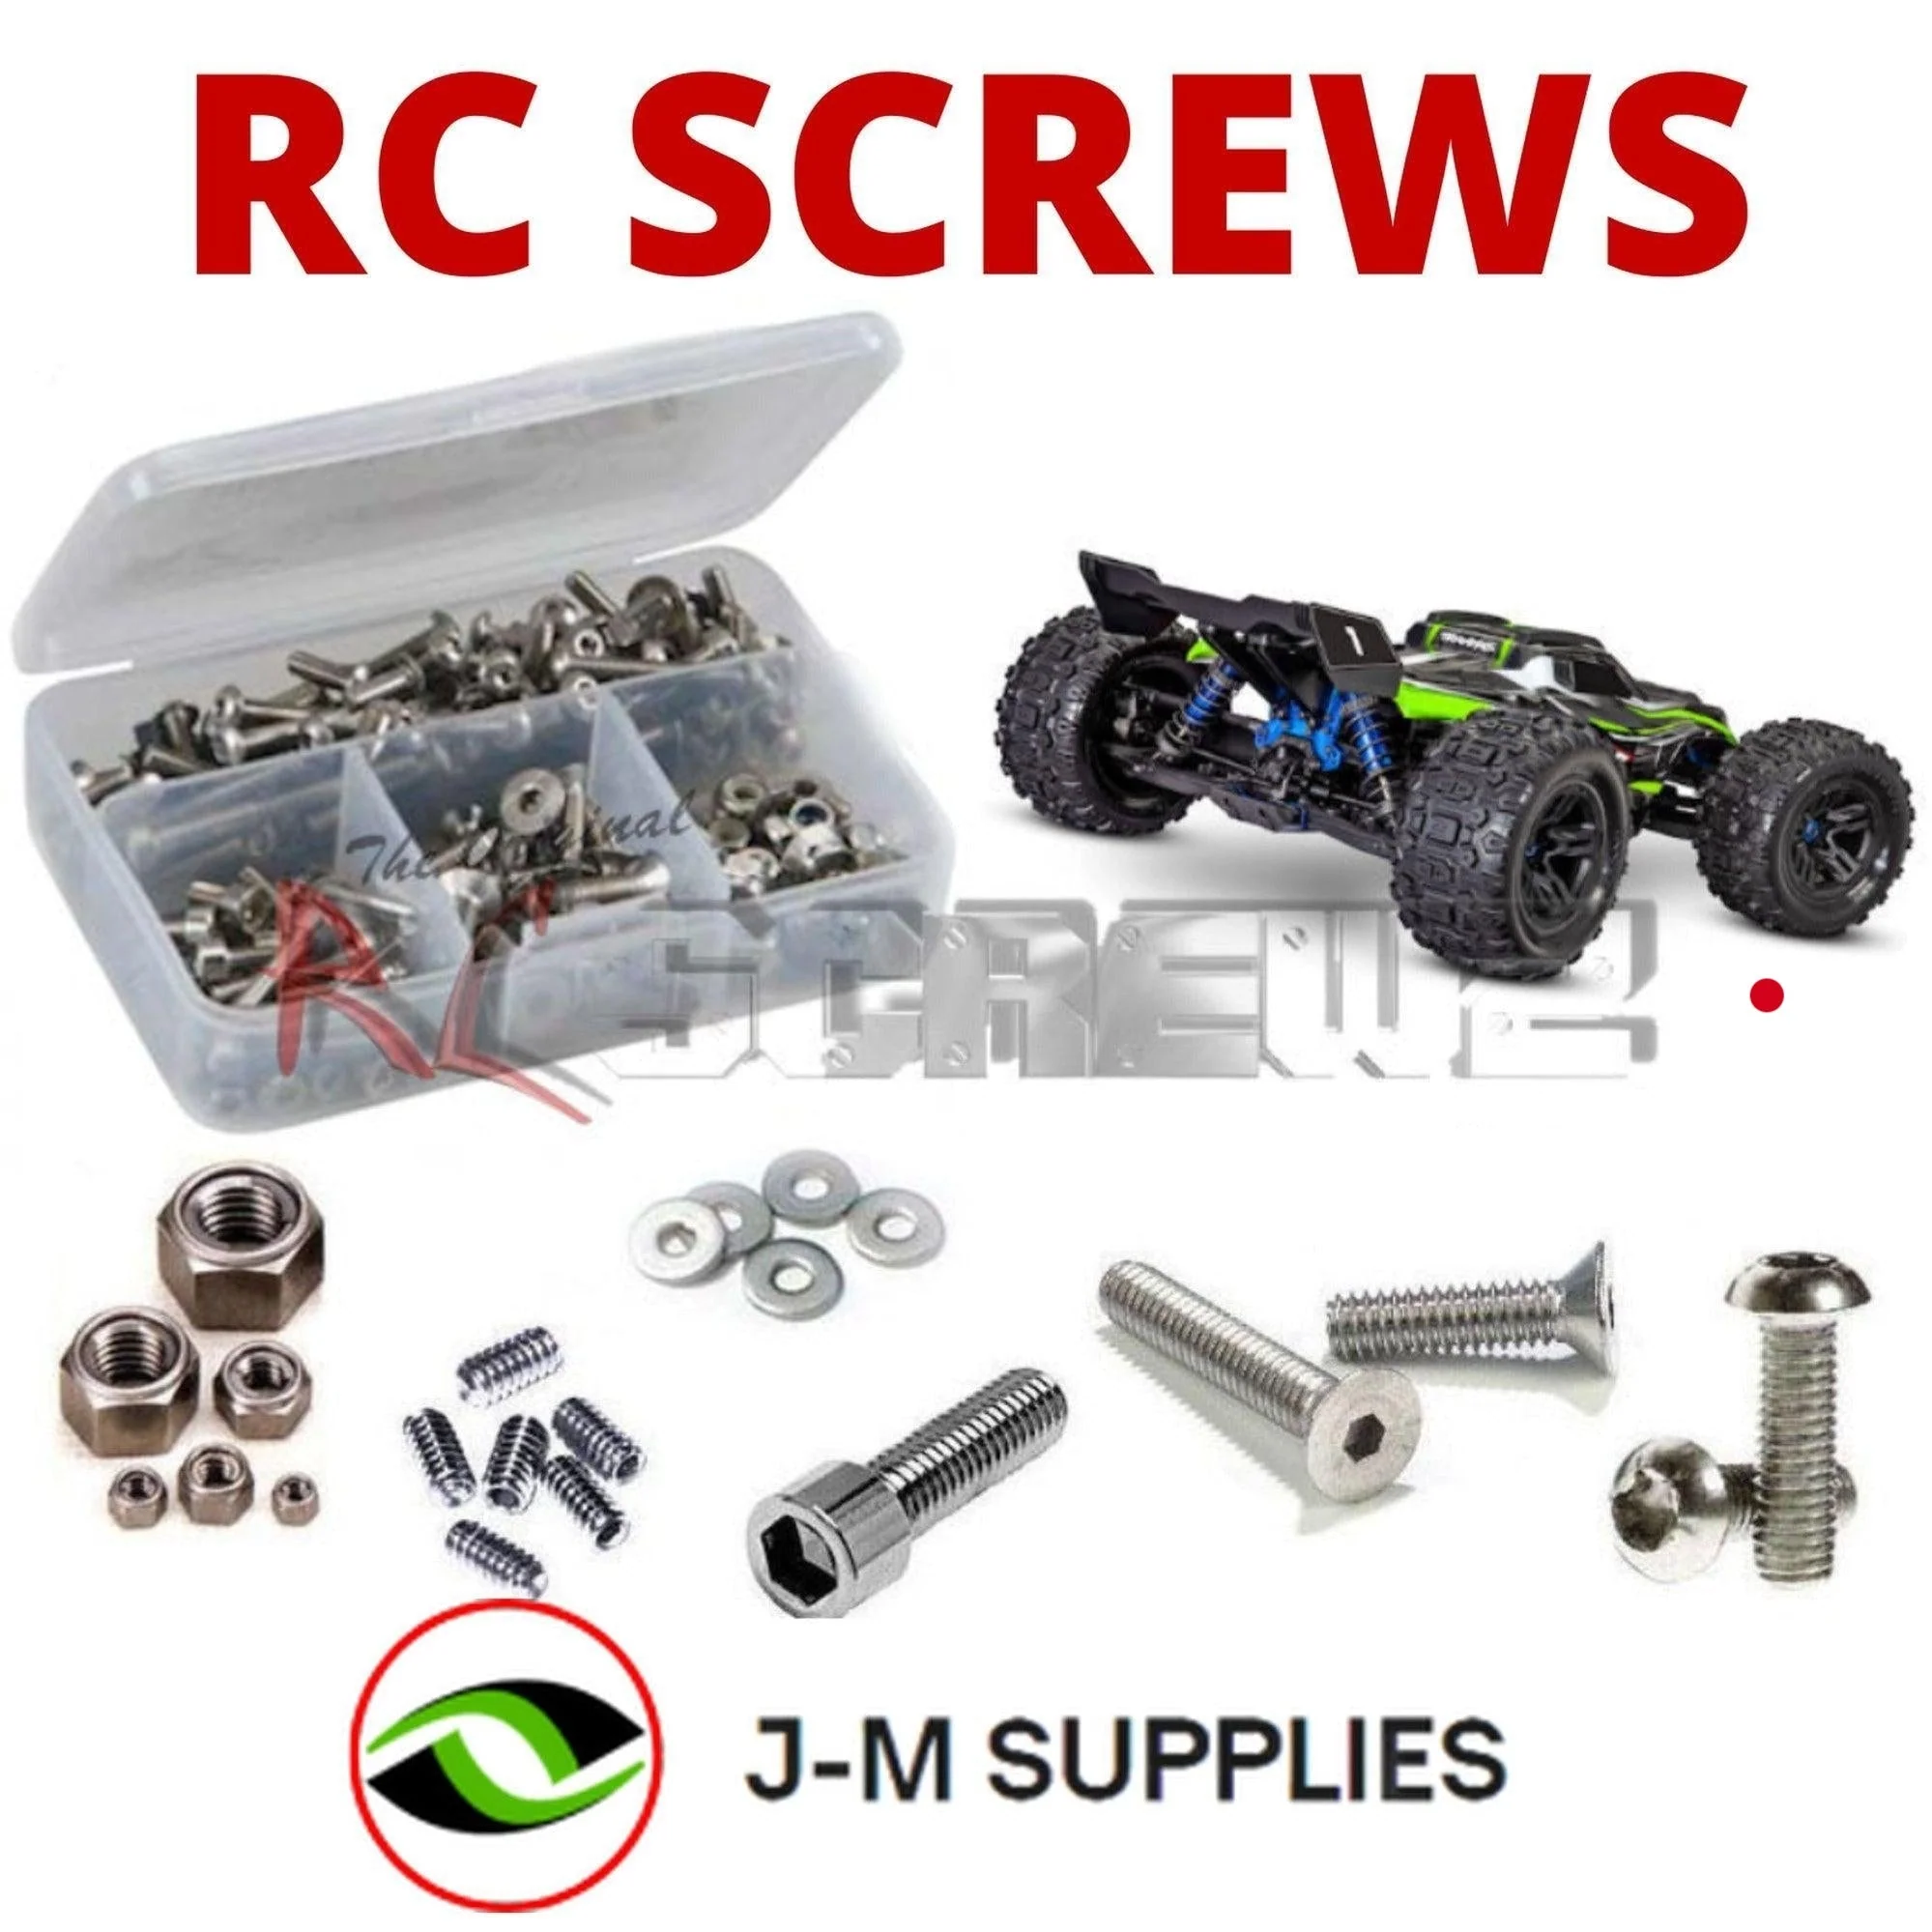 RCScrewZ Stainless Screw Kit tra101 for Traxxas Sledge RTR 6S 4WD 1/8 (#95076-4) - Picture 1 of 12